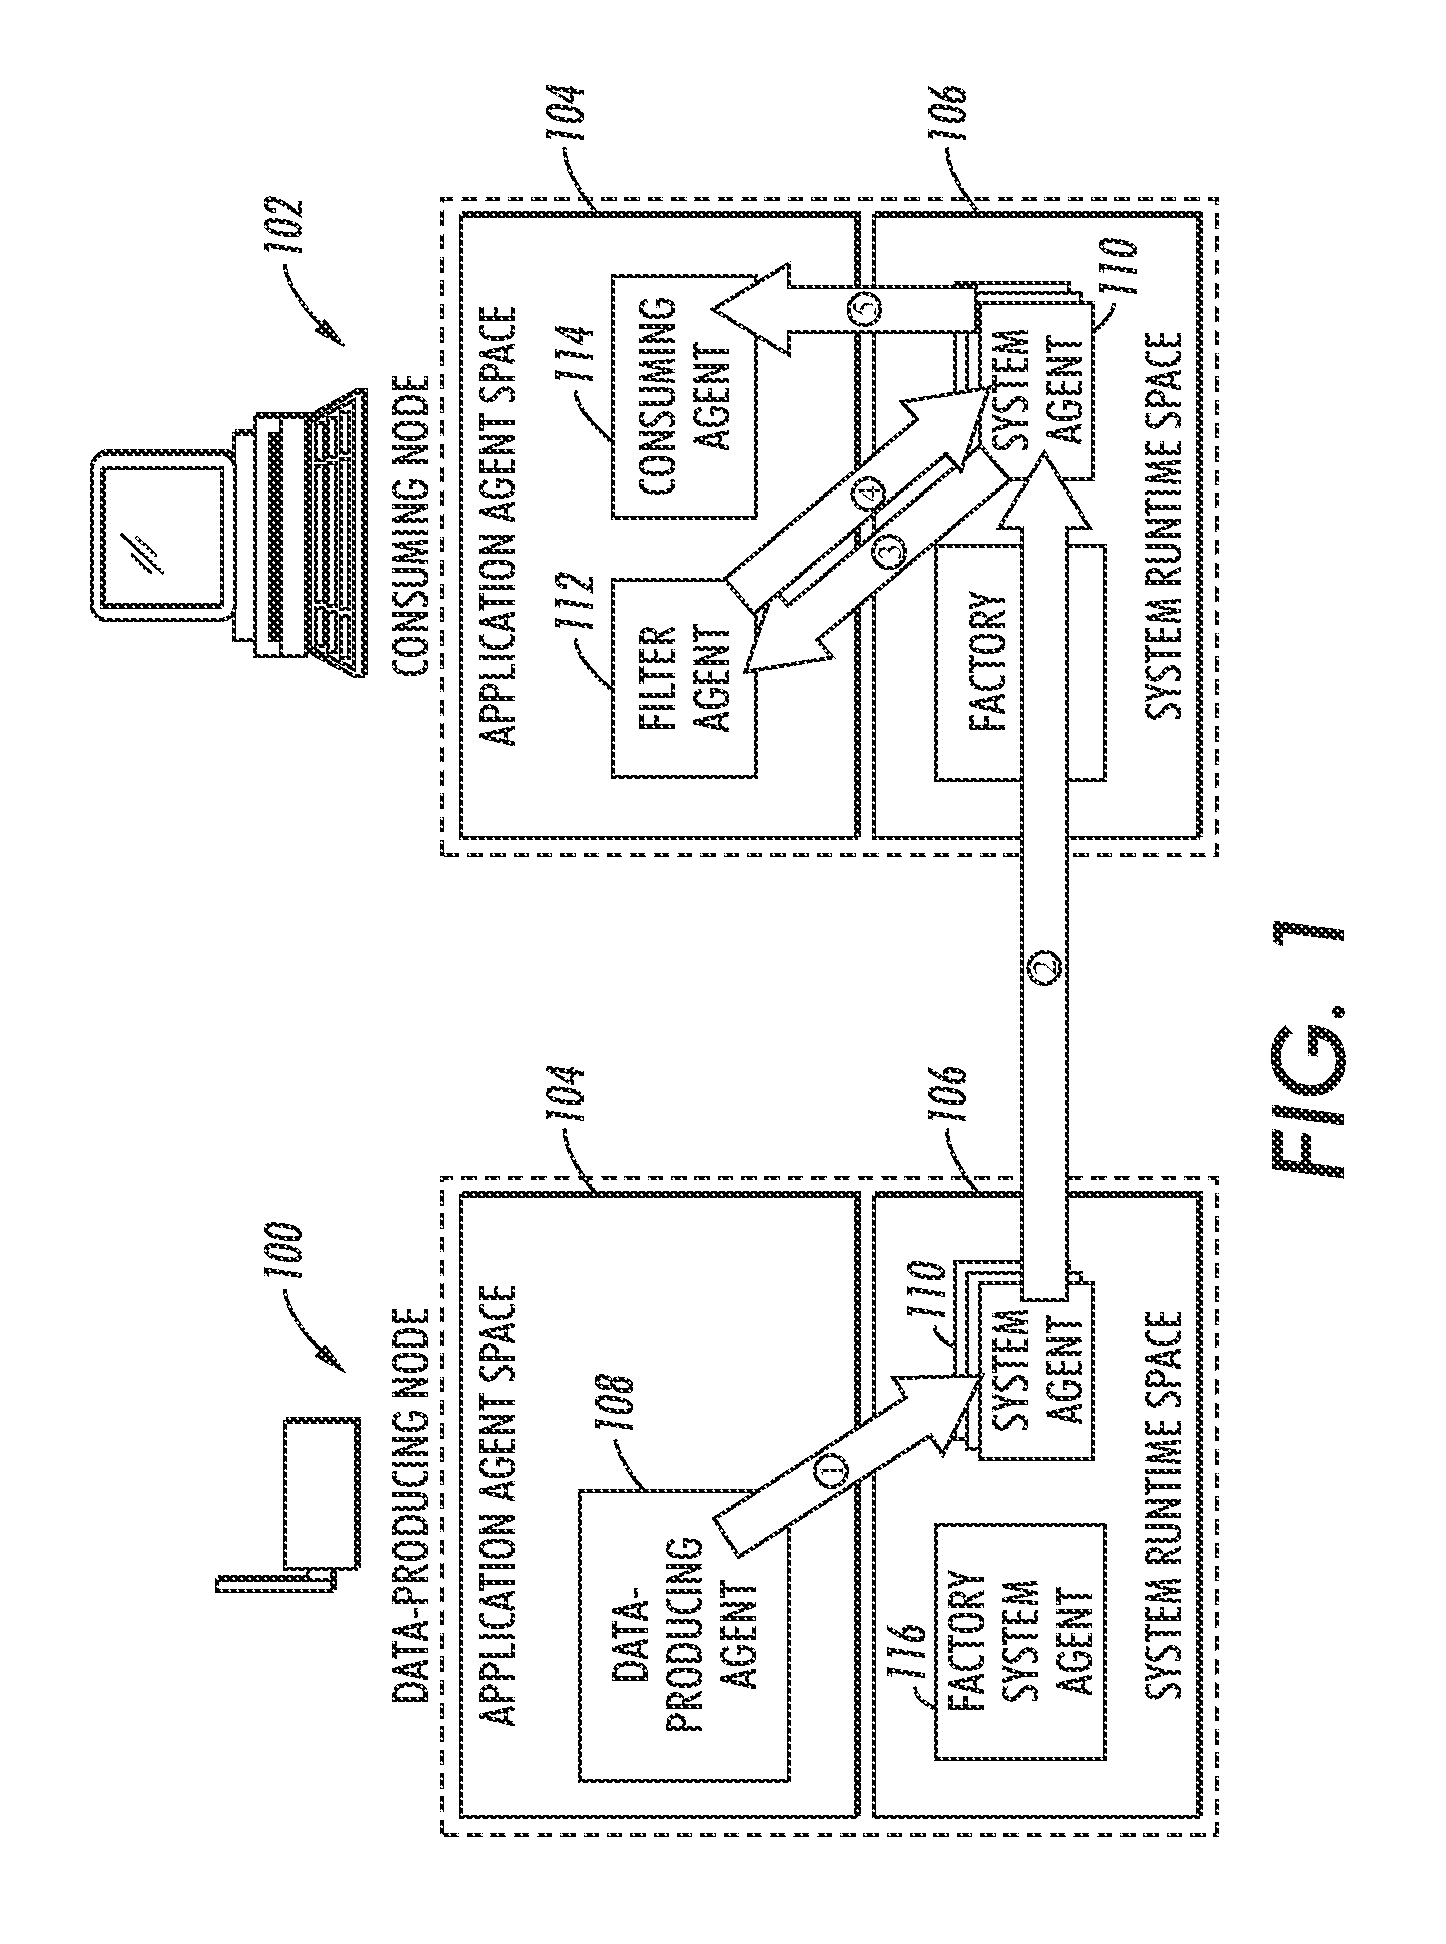 System and method for transferring code to a data producer